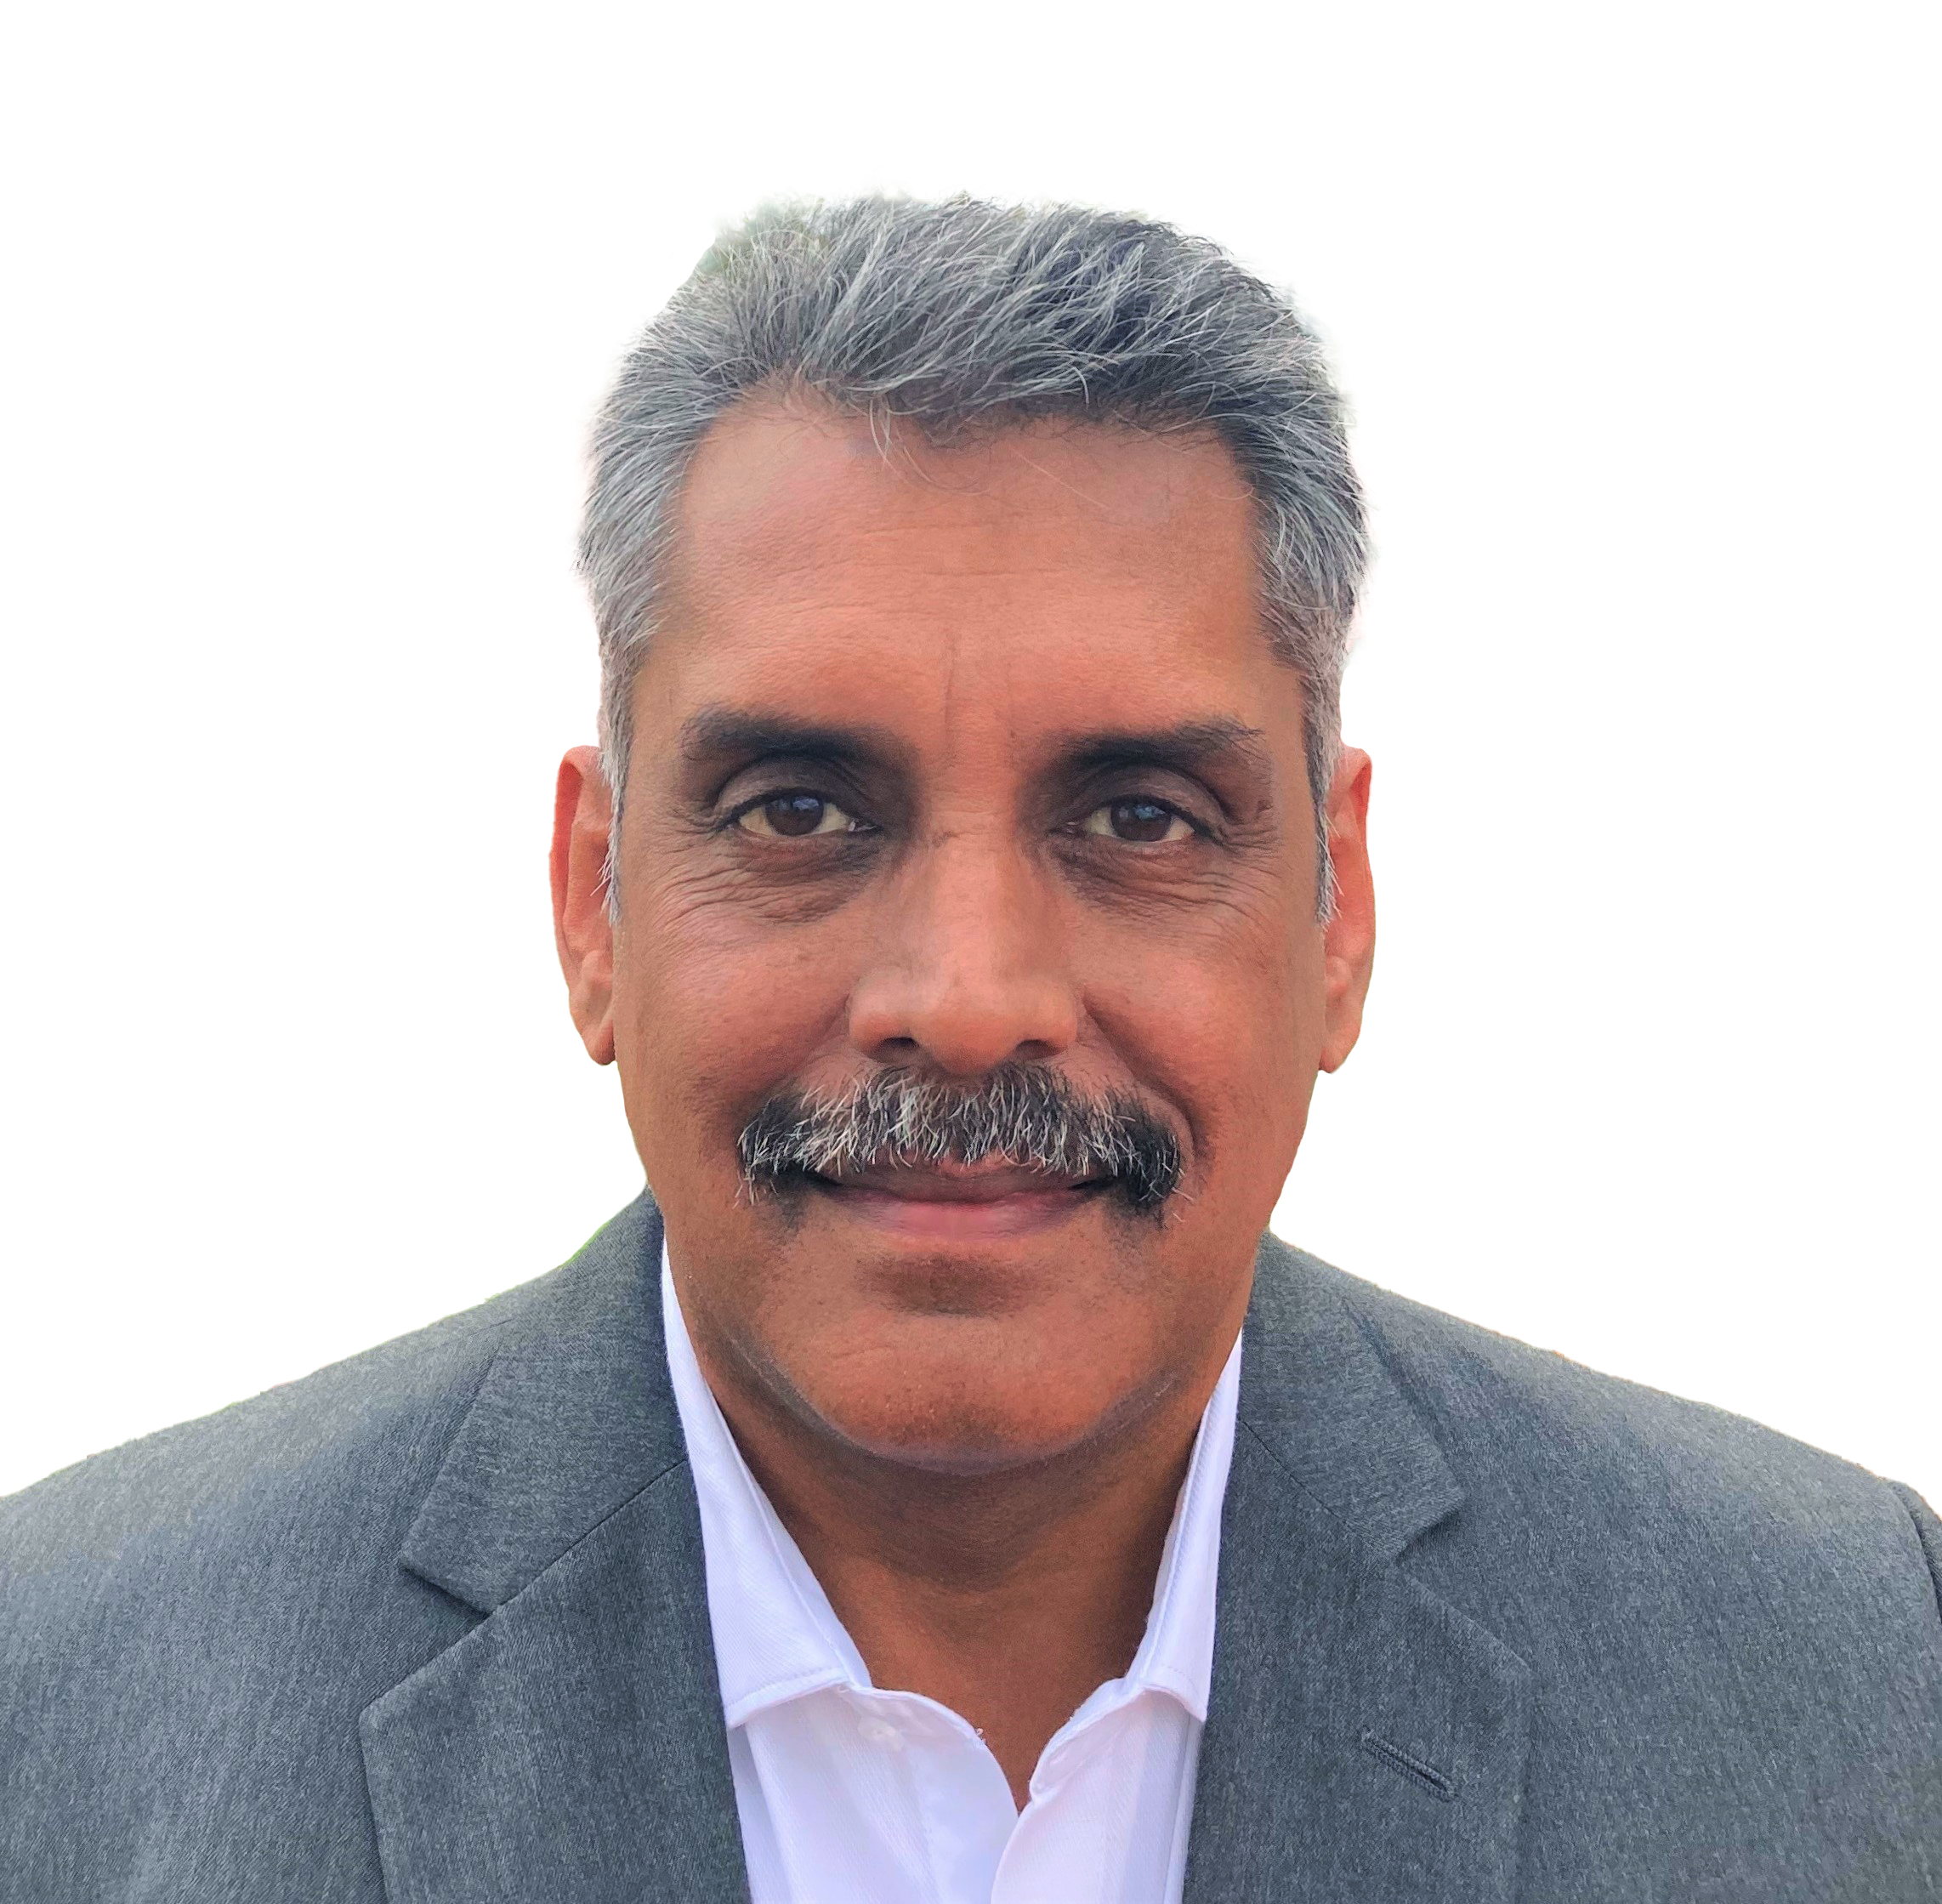 Rohit Pande, <span>Country Manager, India, Copperleaf Technologies</span>